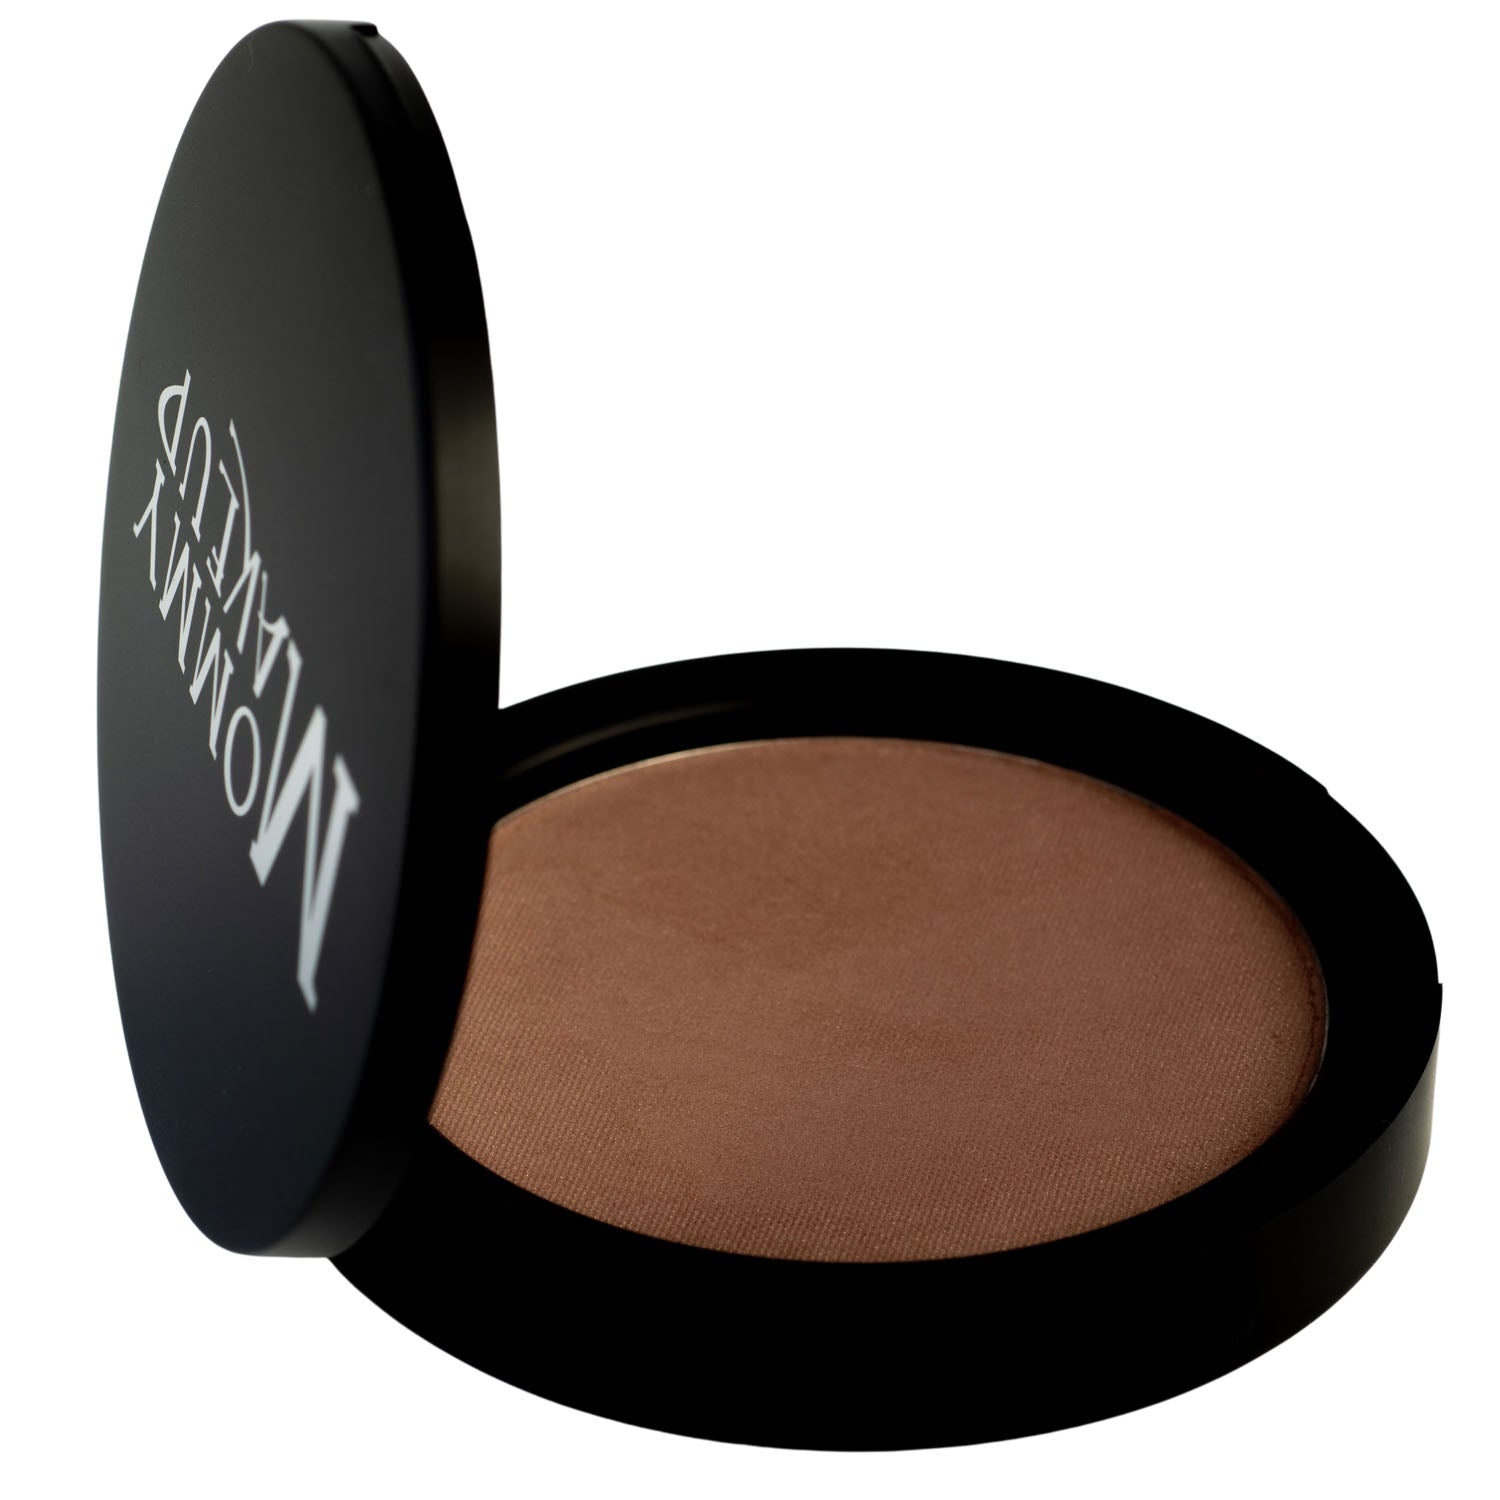 PRESSED Mineral Bronzer is suitable for all skin tones! This pressed-mineral, talc-free bronzer always looks healthy yet natural (never too yellow or "dirty") and gives a natural flush to the cheeks.